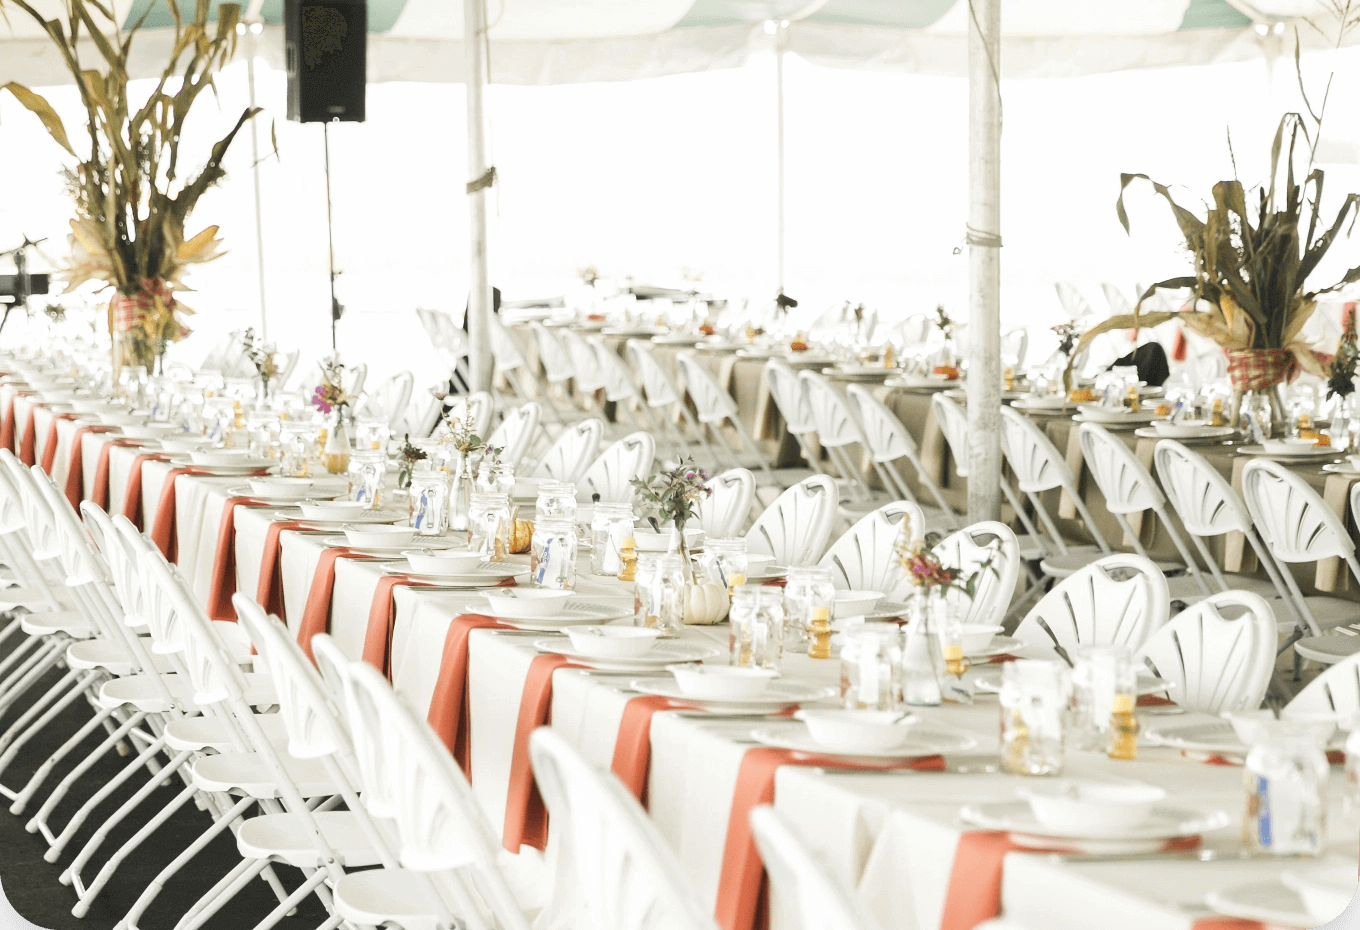 Ornate Banquet Tables